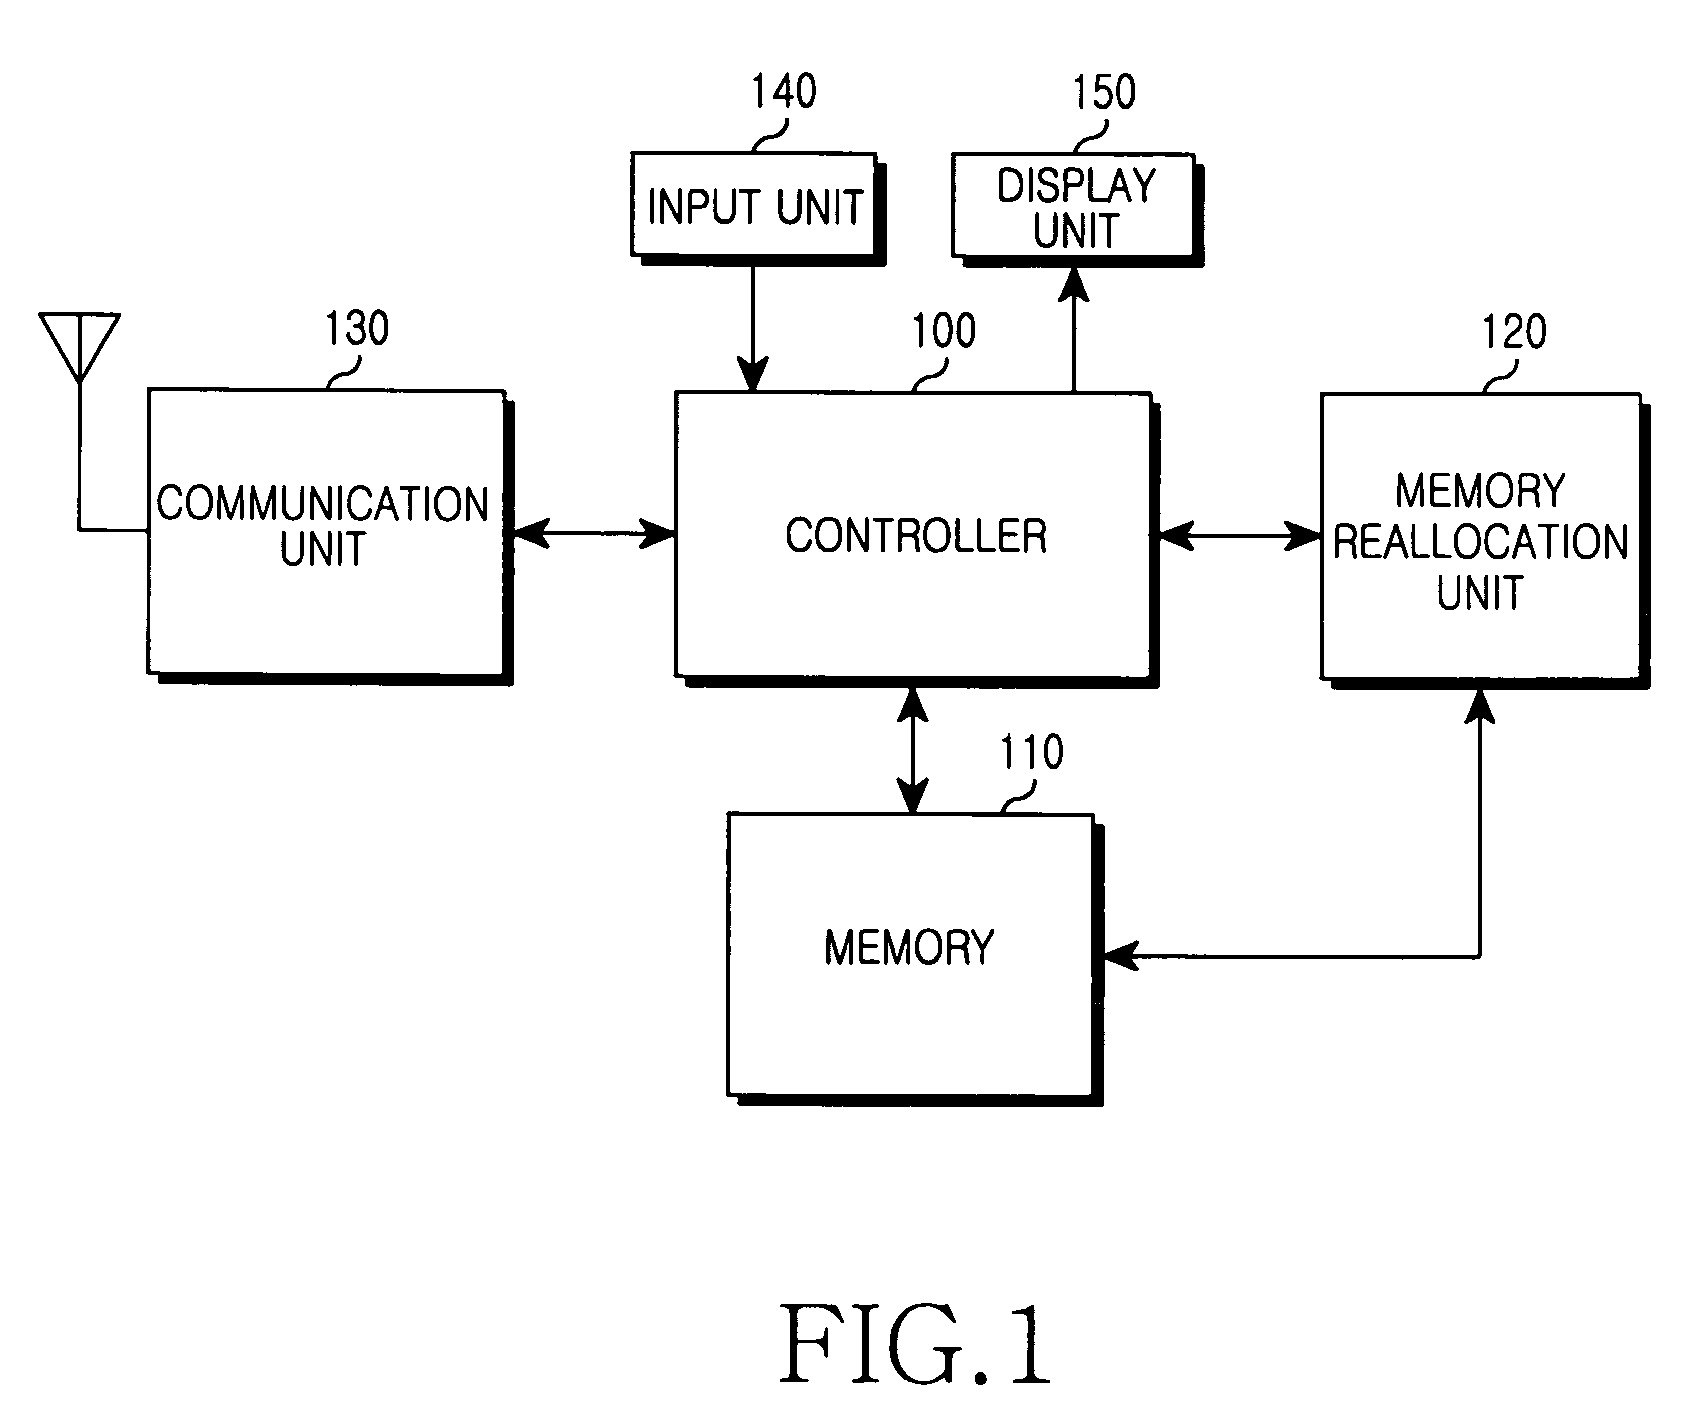 Apparatus and method for reallocation of memory in a mobile communication terminal